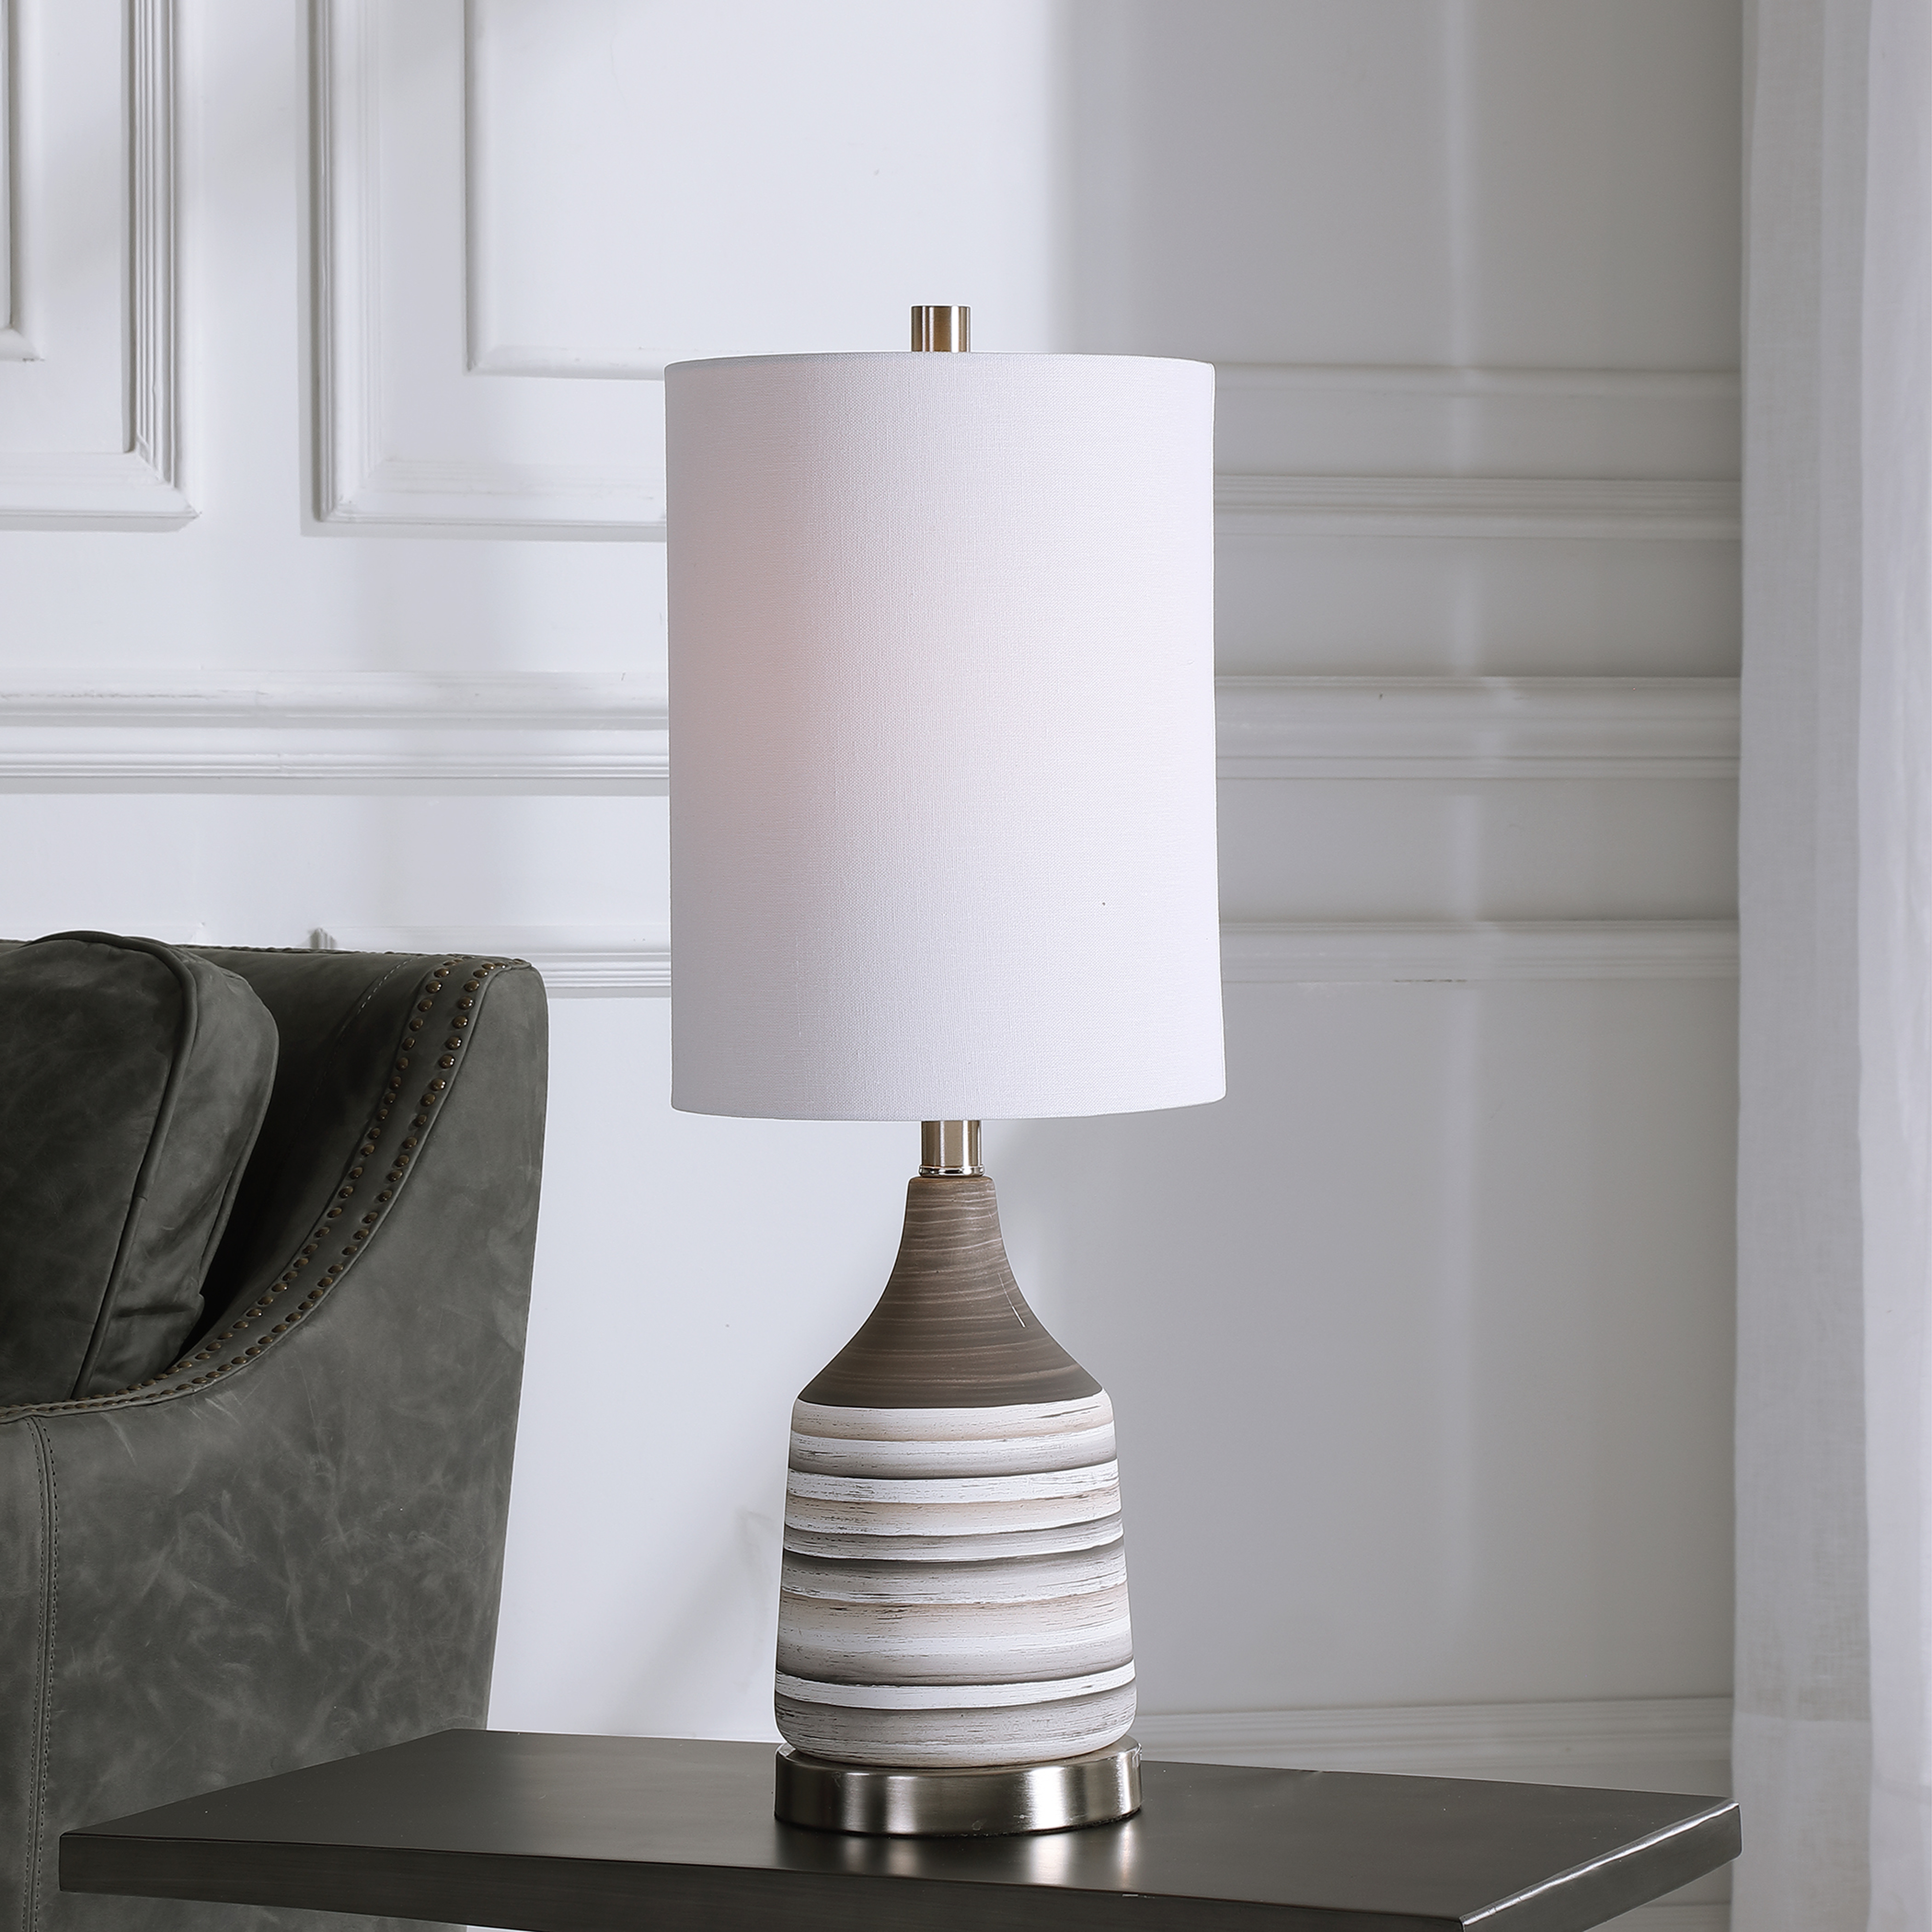 TABLE LAMP - Hudsonhill Foundry